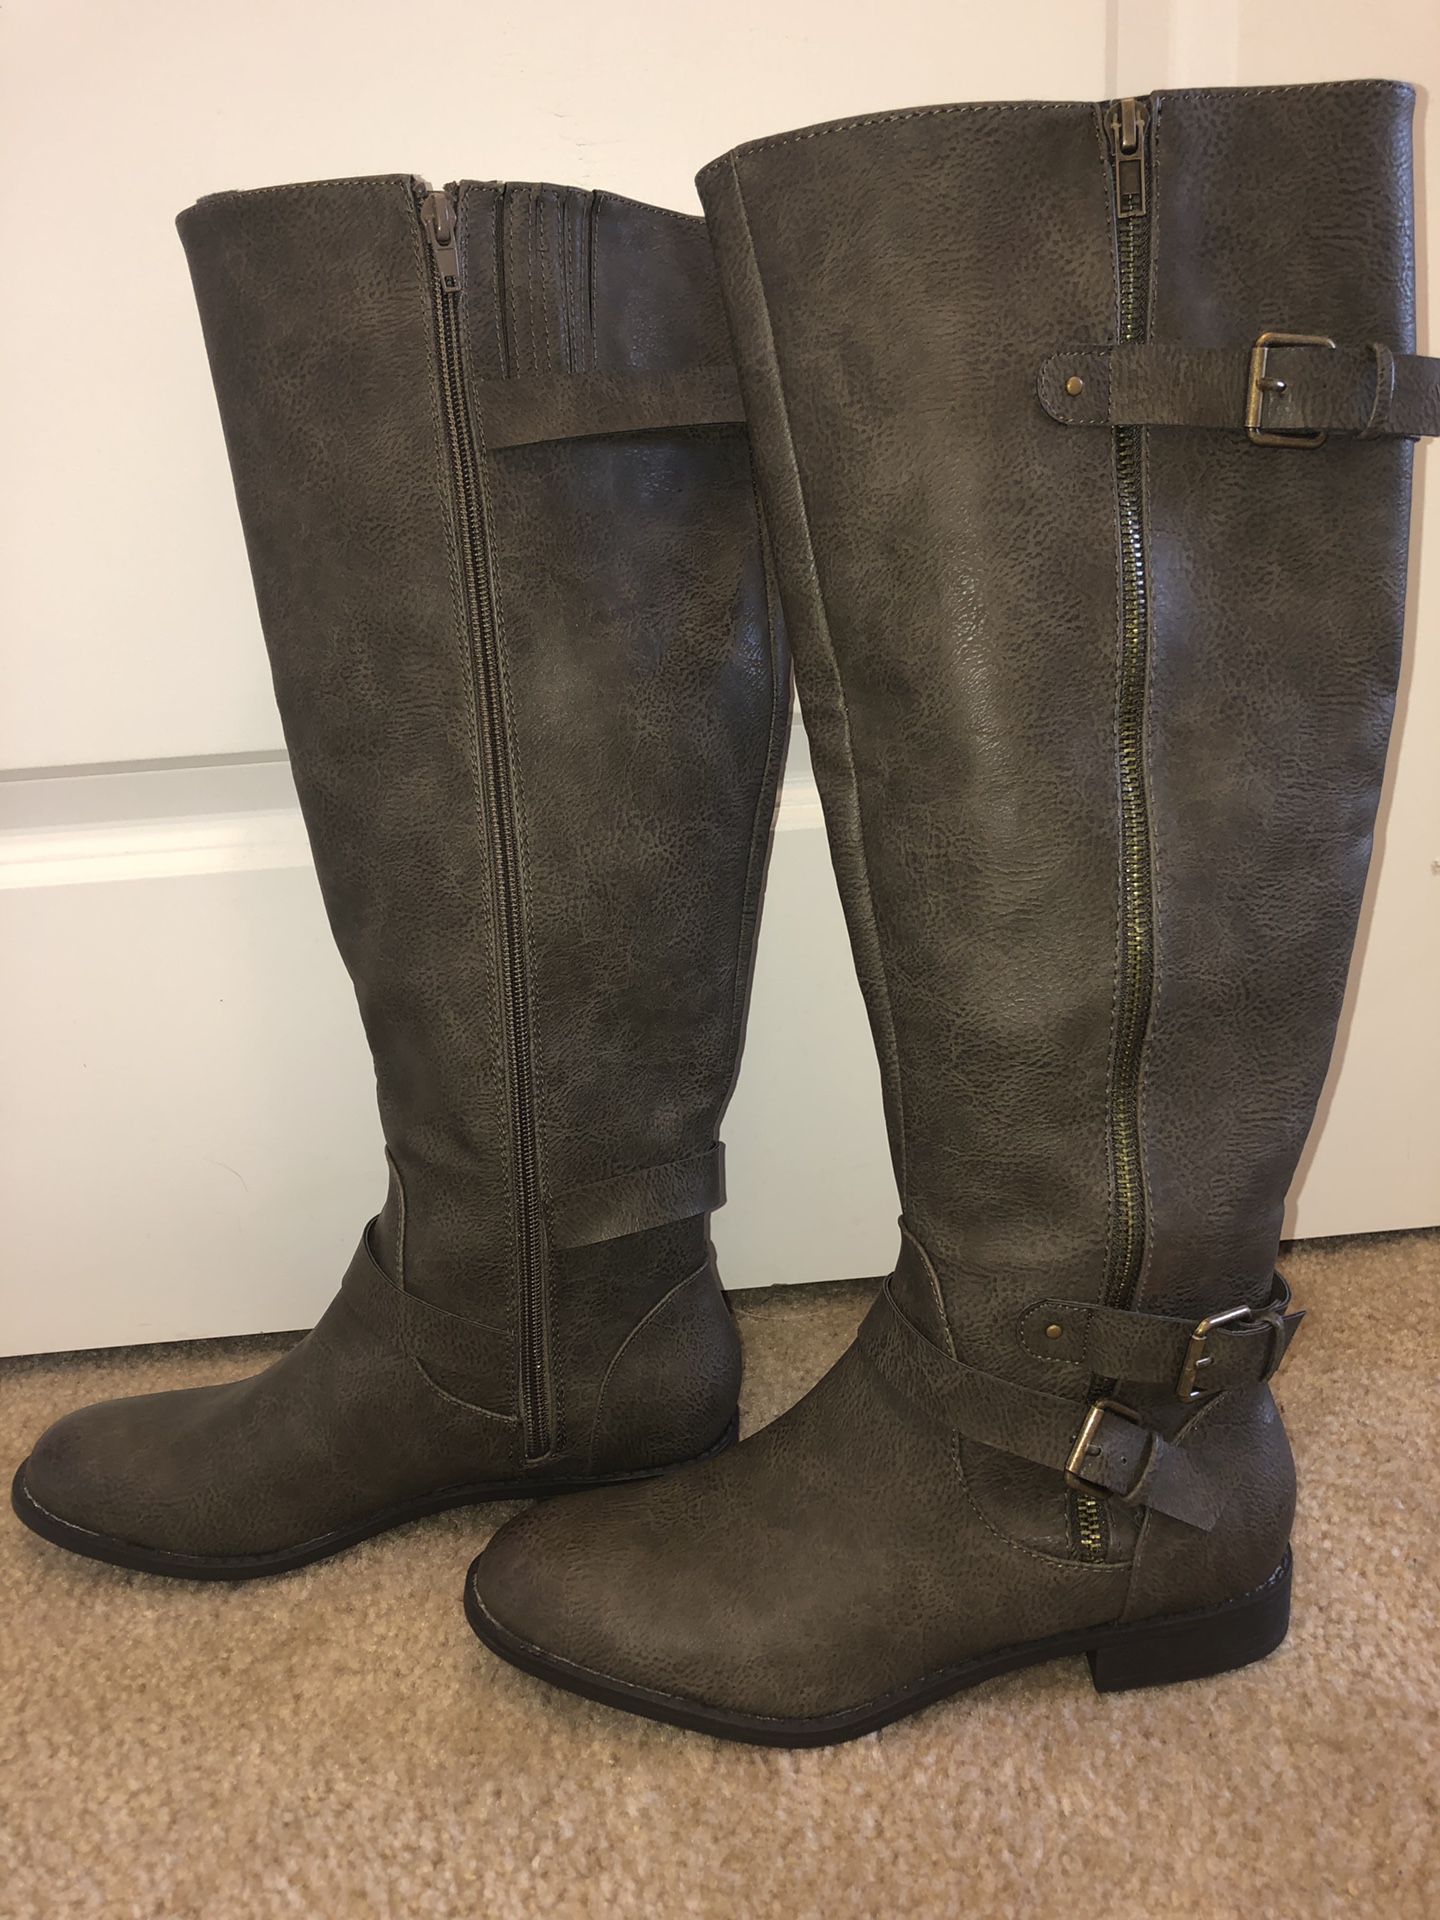 Women’s Just Fab boots size 8.5